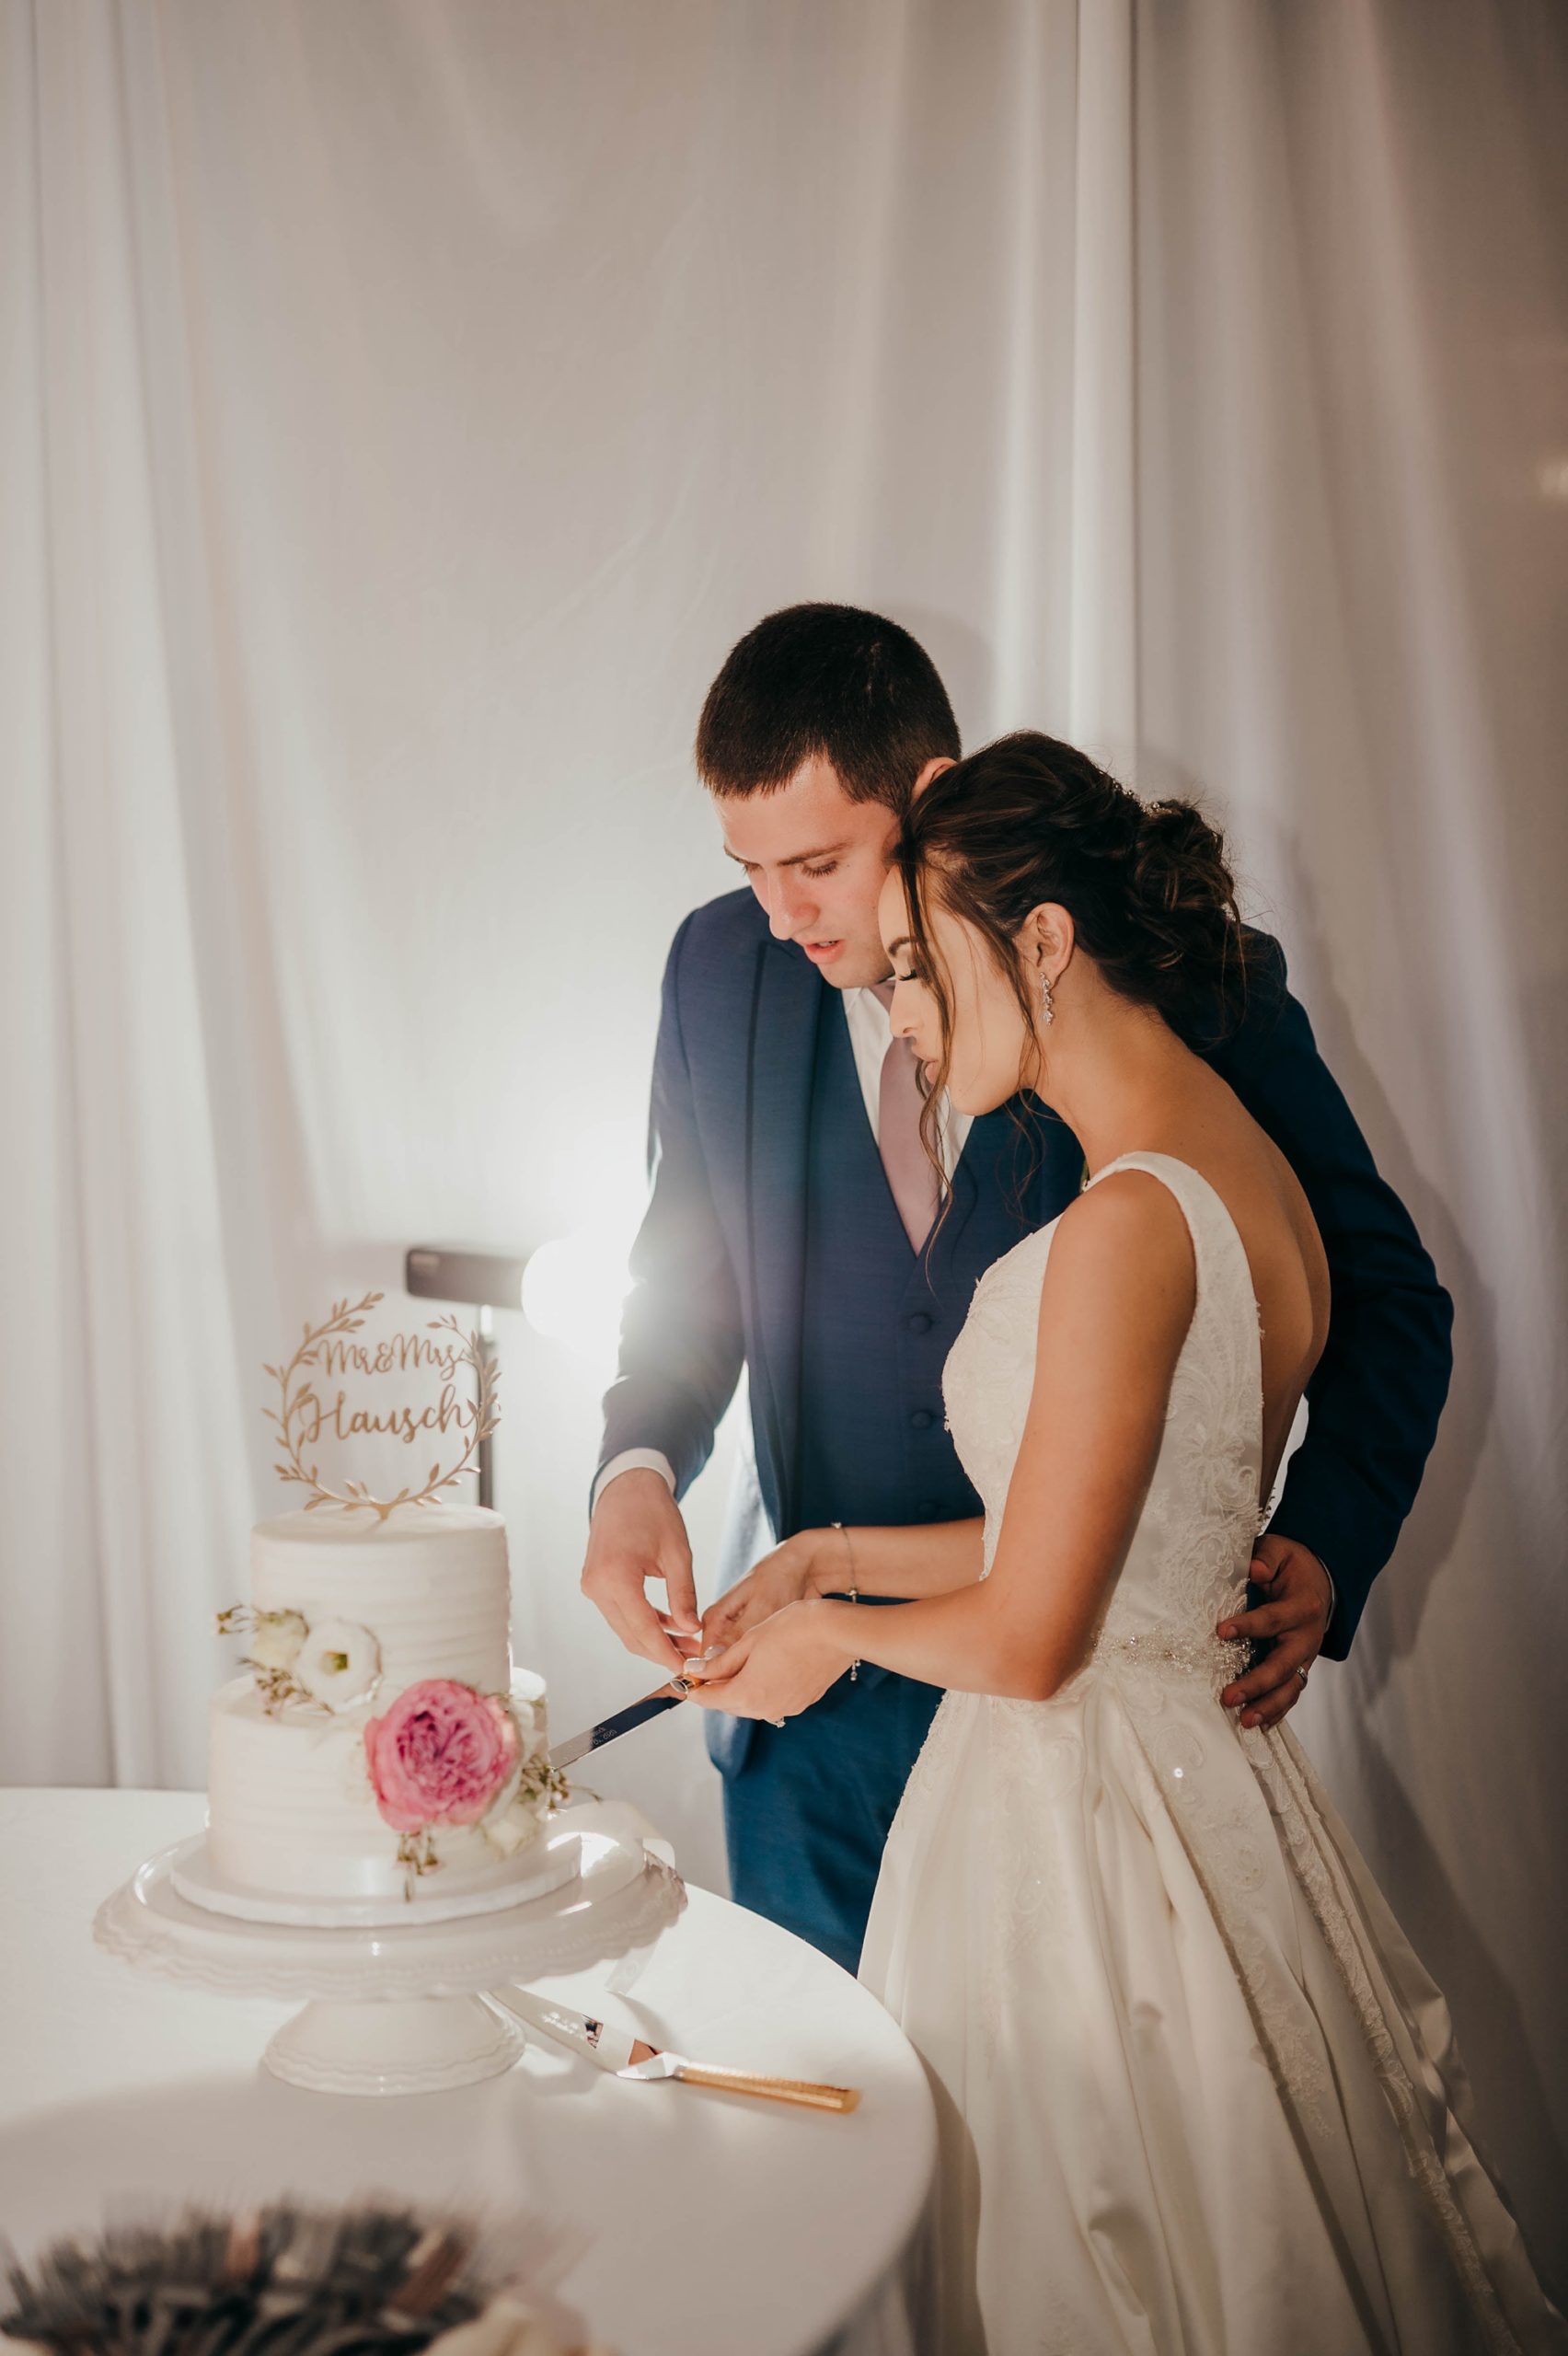 bride and groom cut wedding cake during elegant fall wedding reception at the Quality Inn Montpelier OH